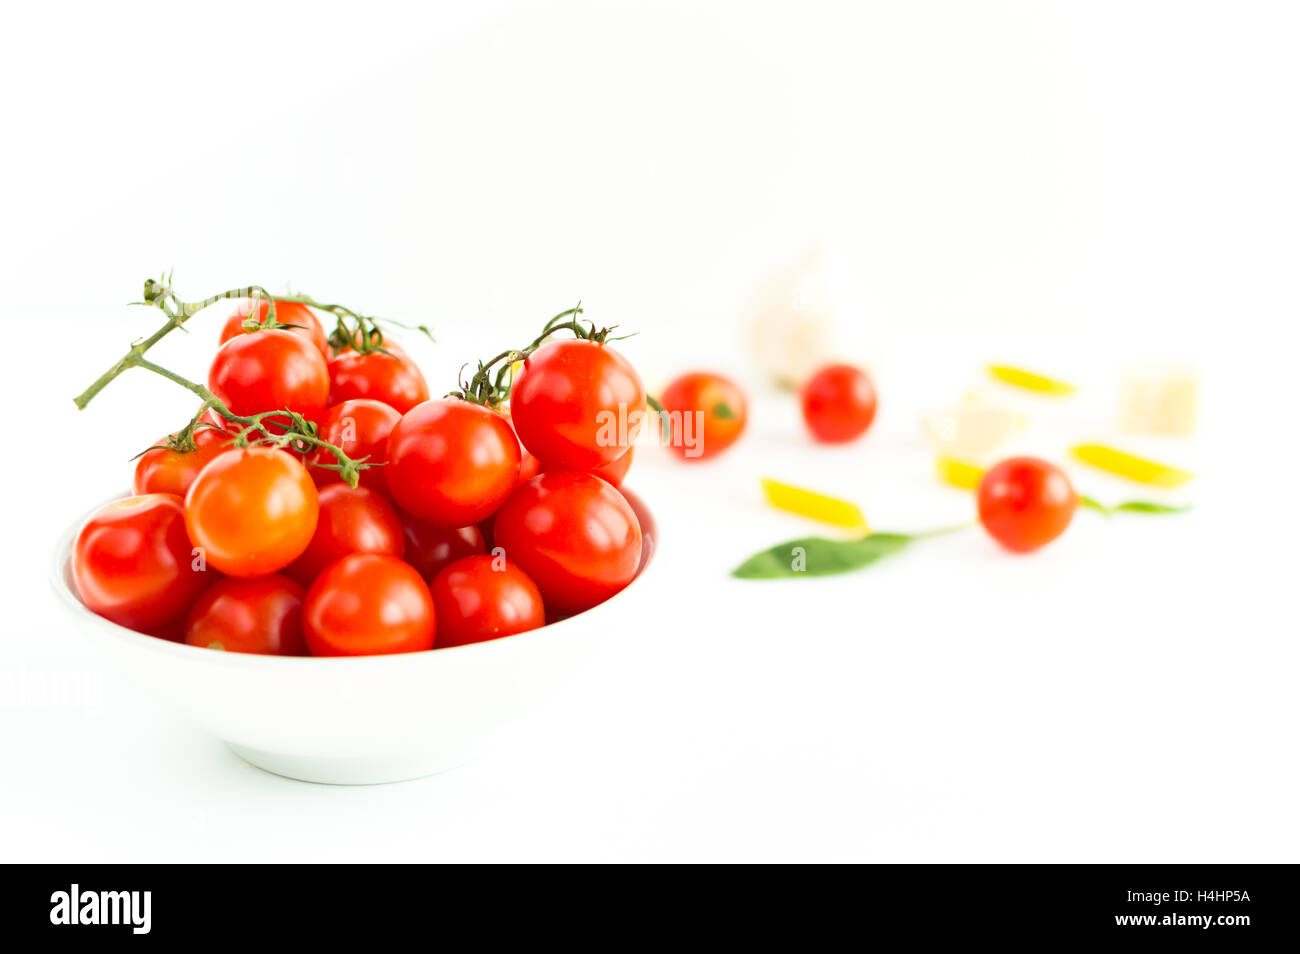 Italian red tomatoes close up food with pasta, basil leafs, cheese, isolated on white background Stock Photo